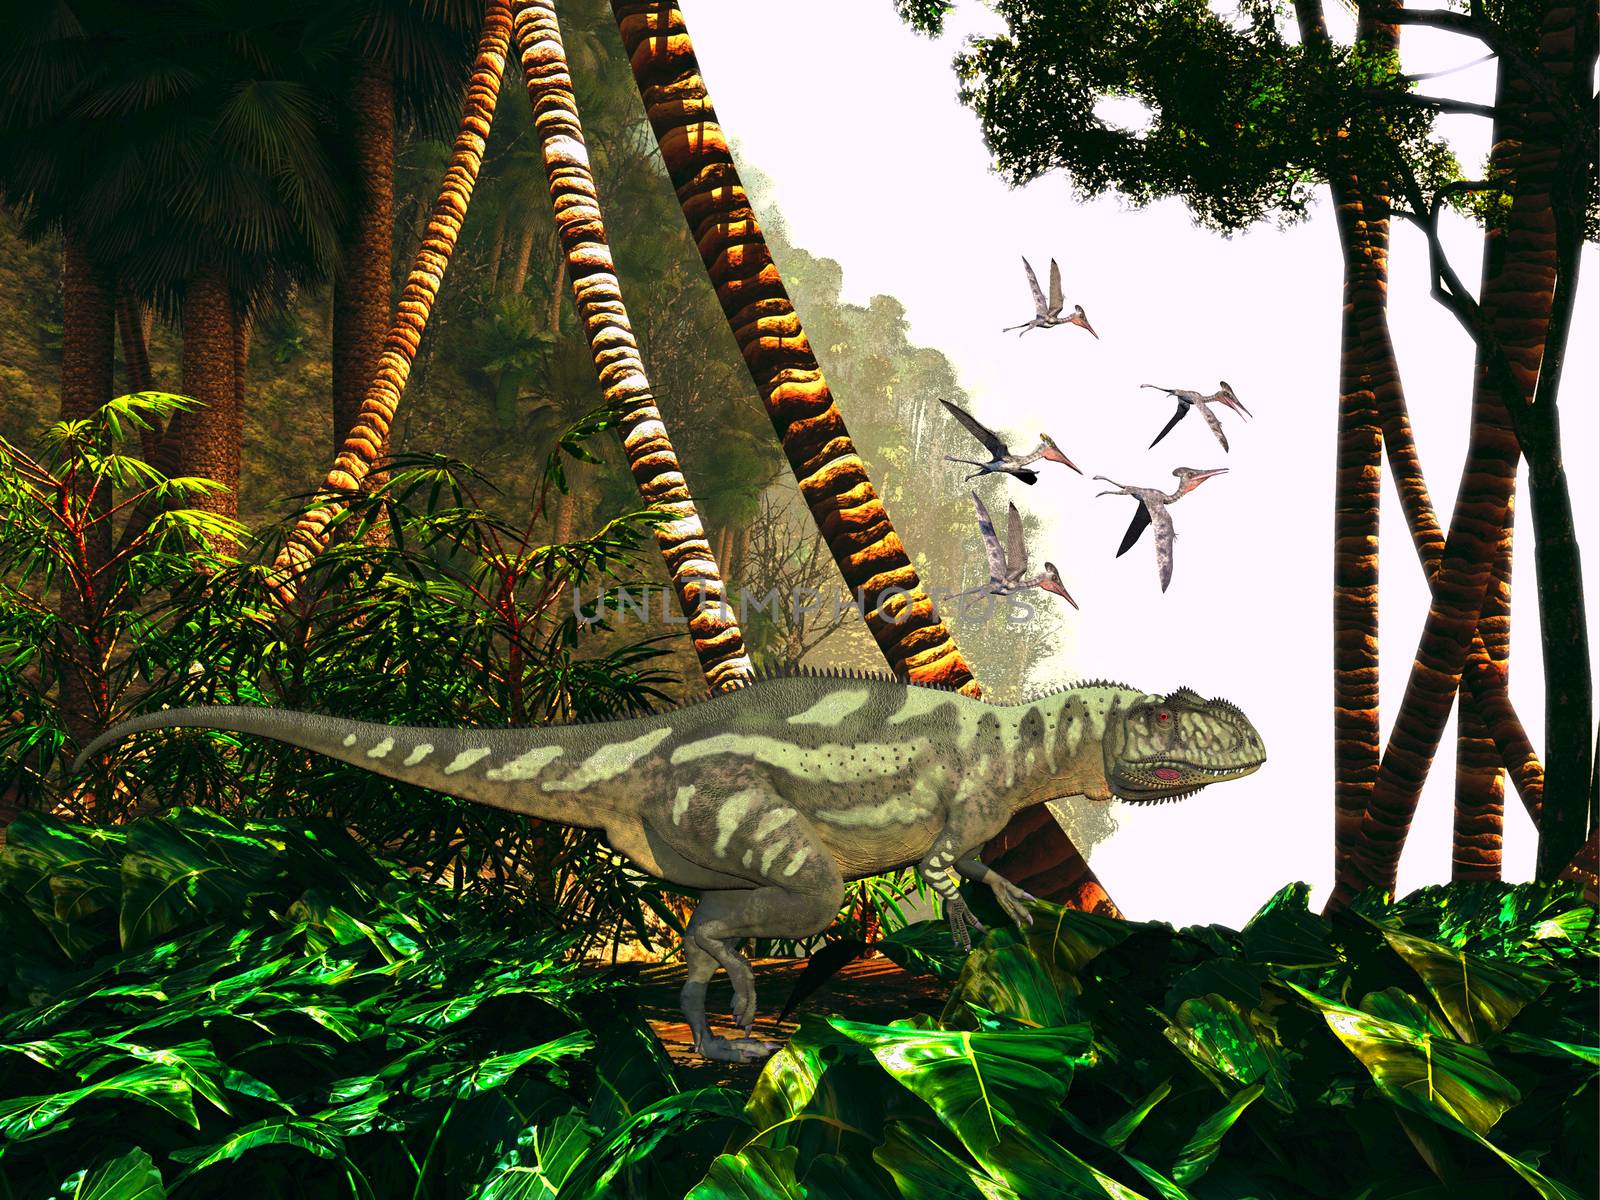 A Yangchuanosaurus hunts through heavy jungle foliage for prey as a flock of Pterodactylus reptiles keep close watch on him.